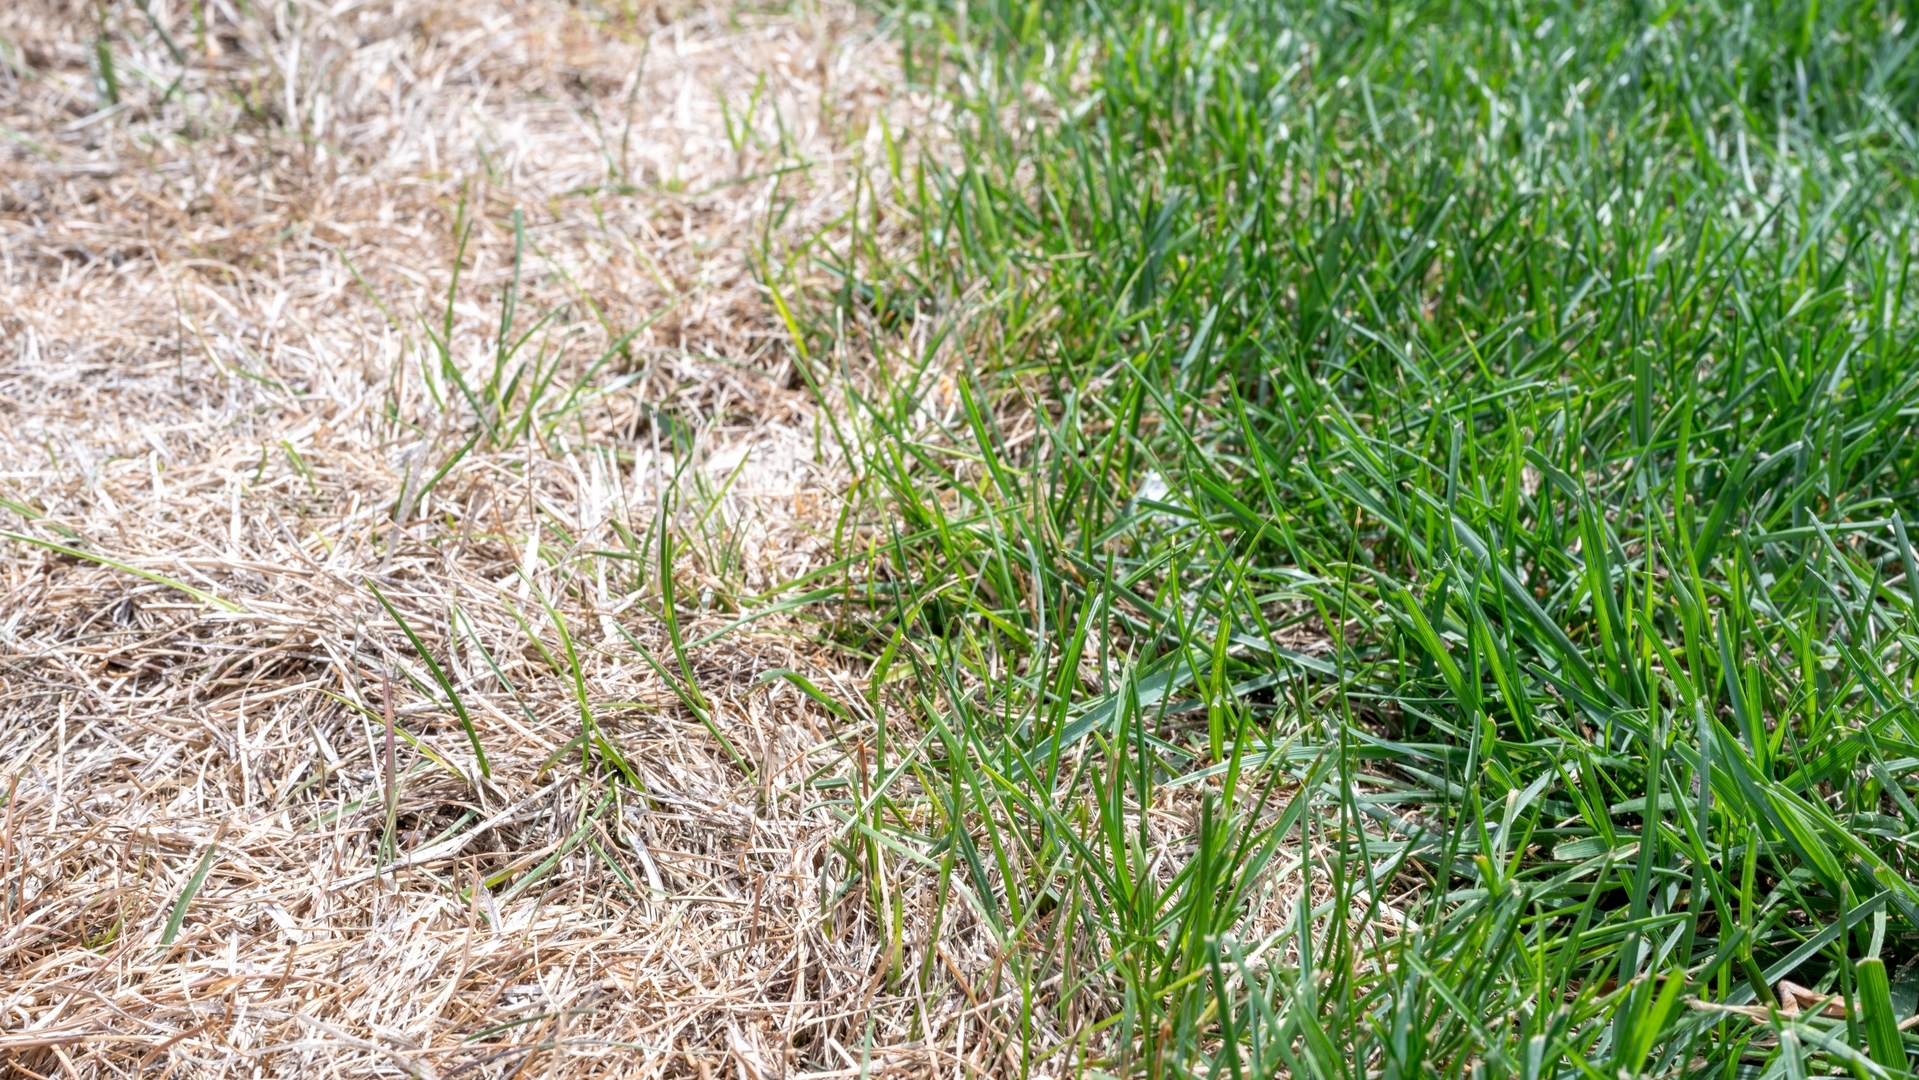 Don’t Overfertilize Your Lawn - It Could End up Doing More Harm Than Good